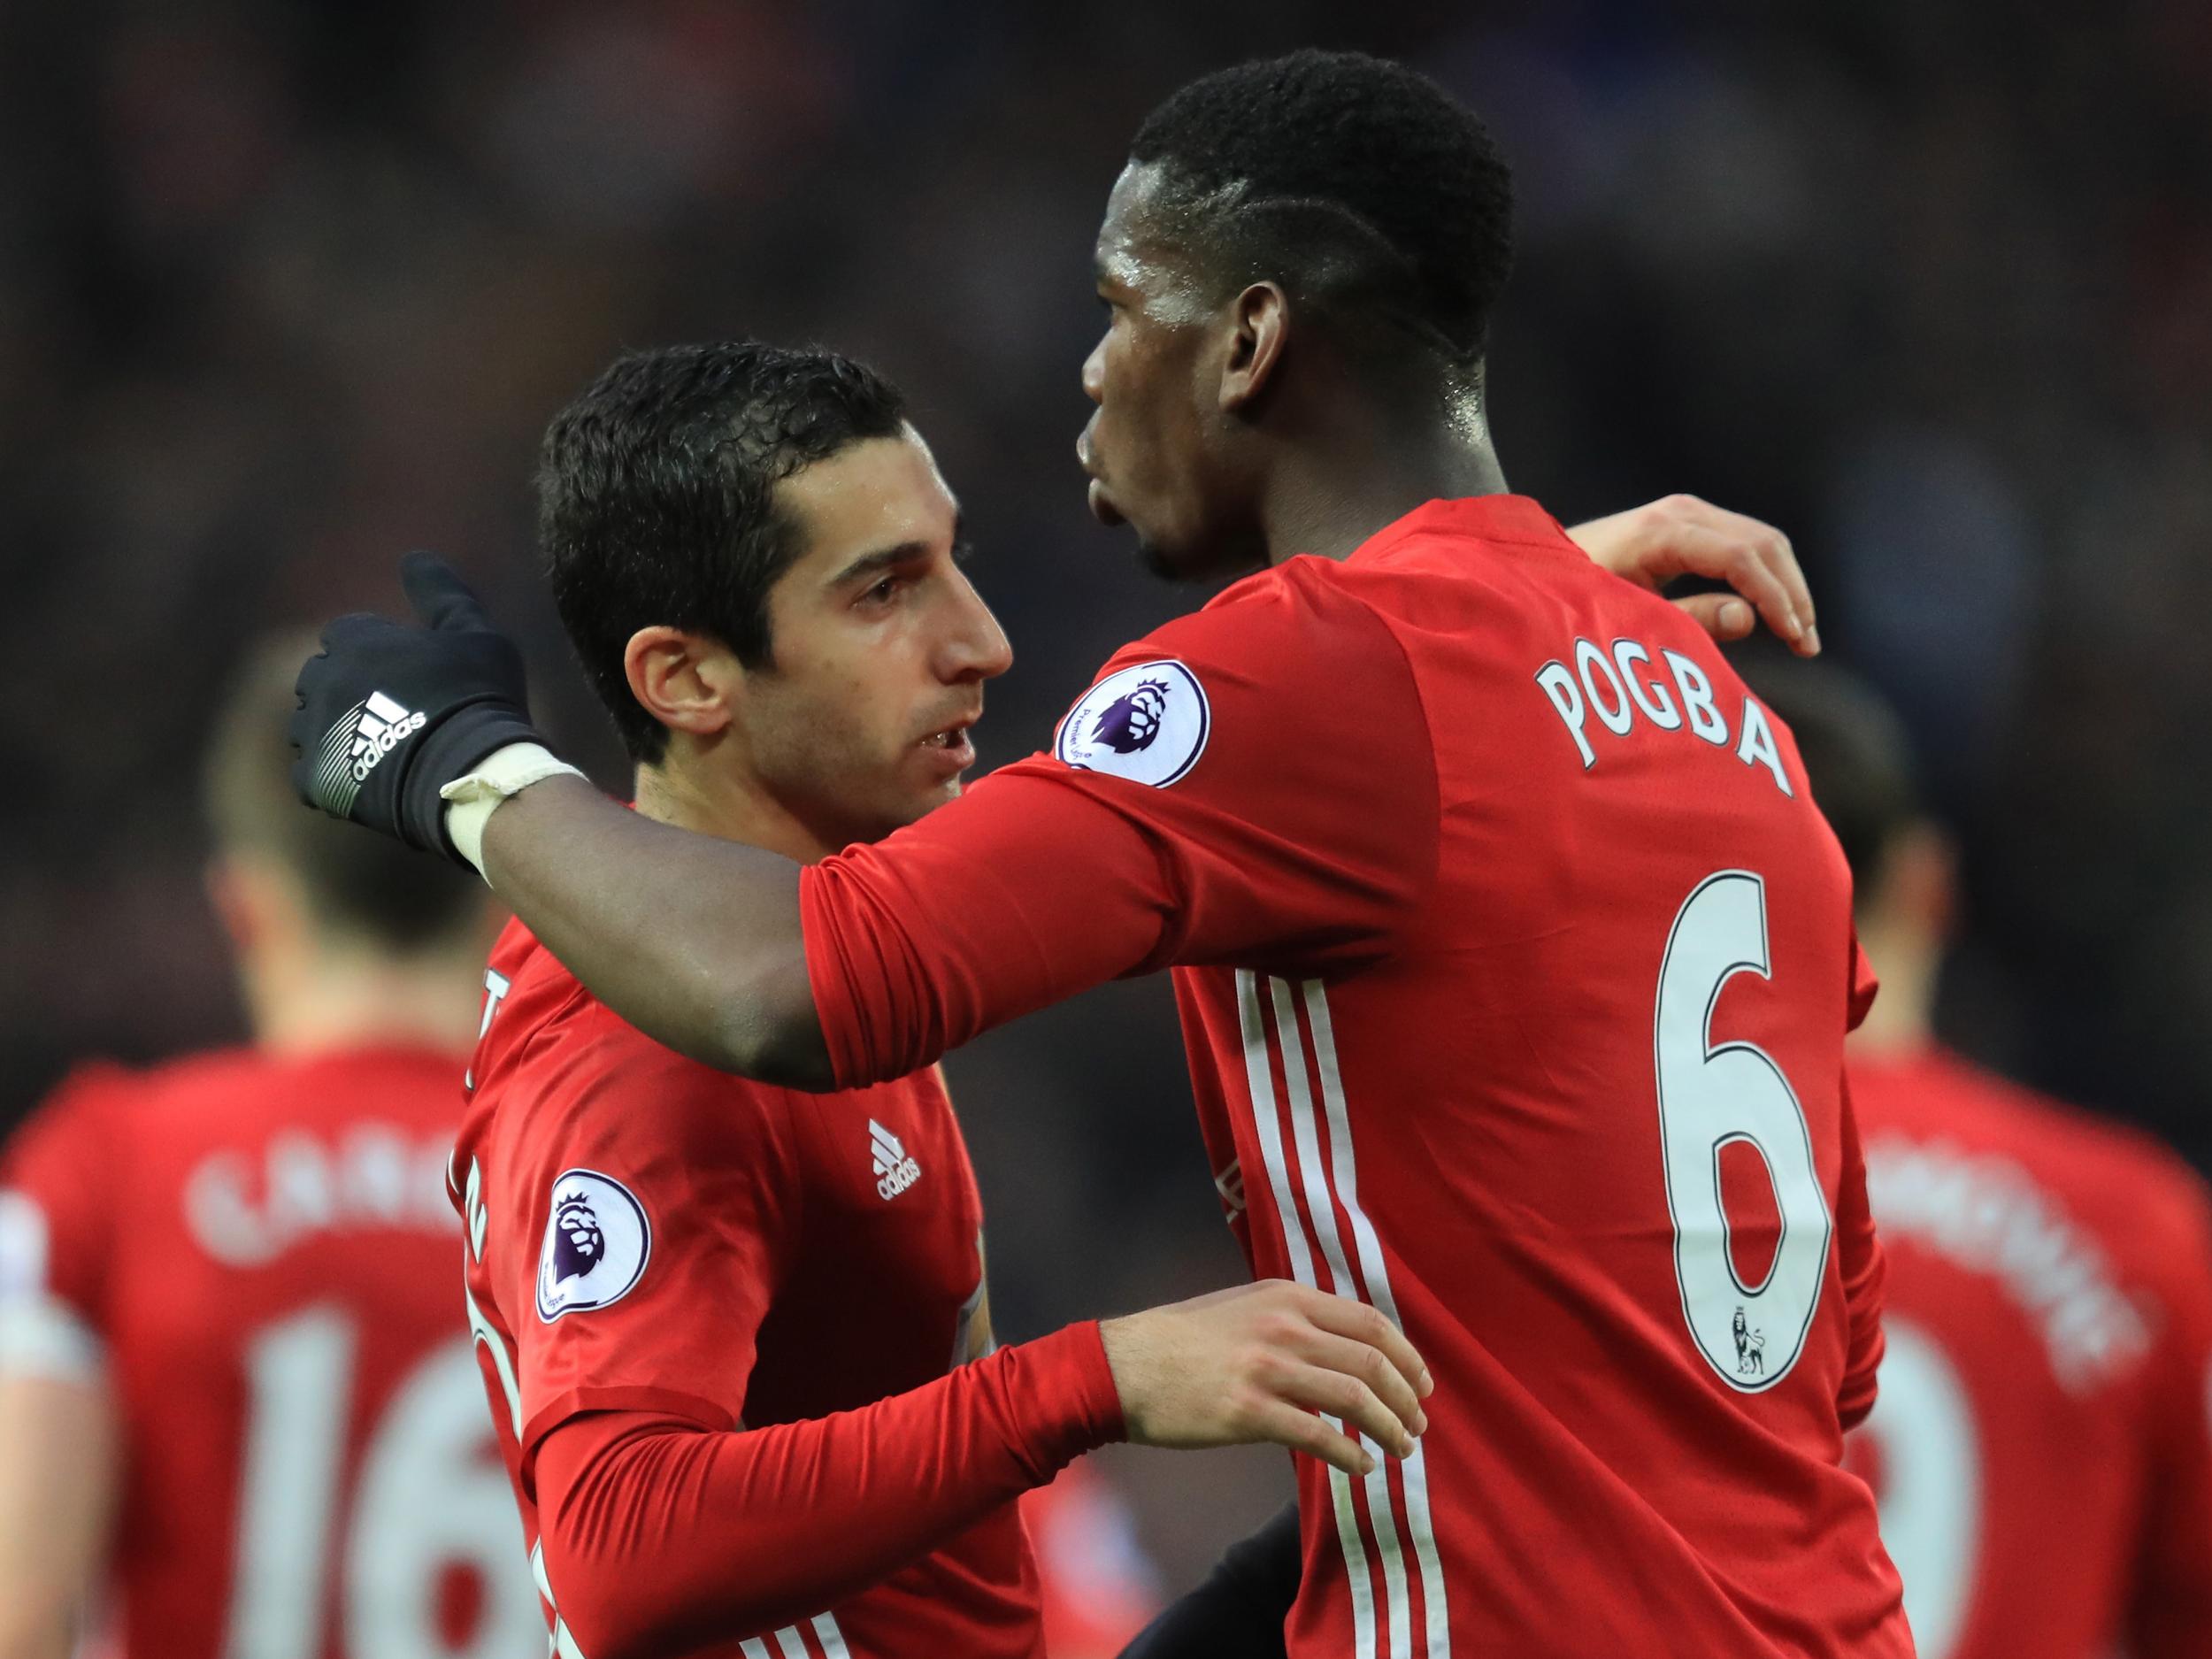 Mkhitaryan: Manchester United not giving up on Premier League